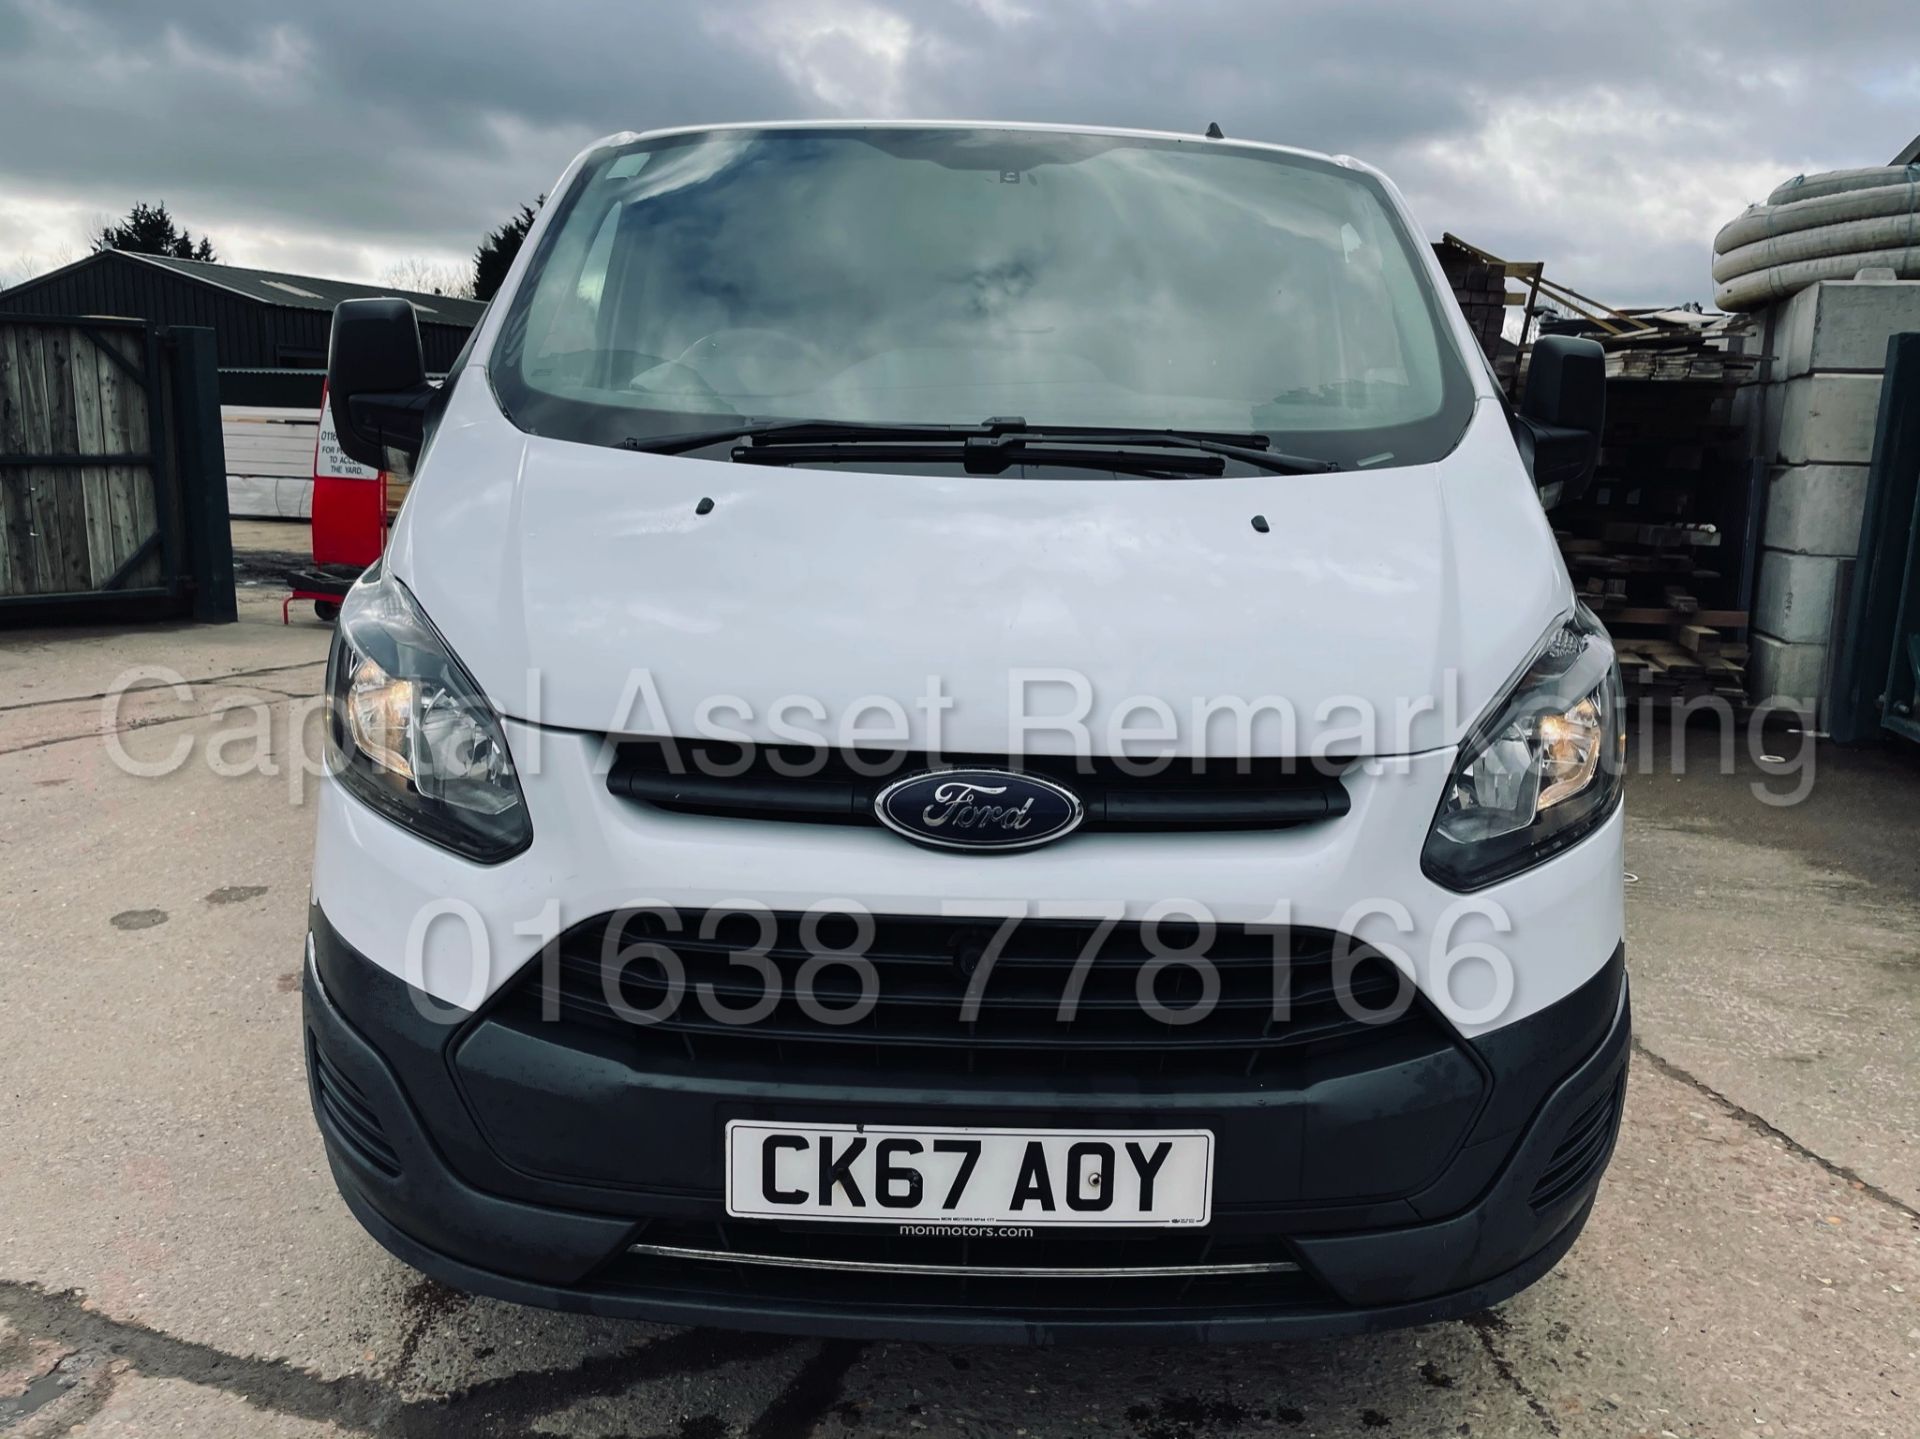 FORD TRANSIT CUSTOM 270 *SWB - PANEL VAN* (2018 - EURO 6) '2.0 TDCI - 6 SPEED' (1 OWNER FROM NEW) - Image 4 of 37